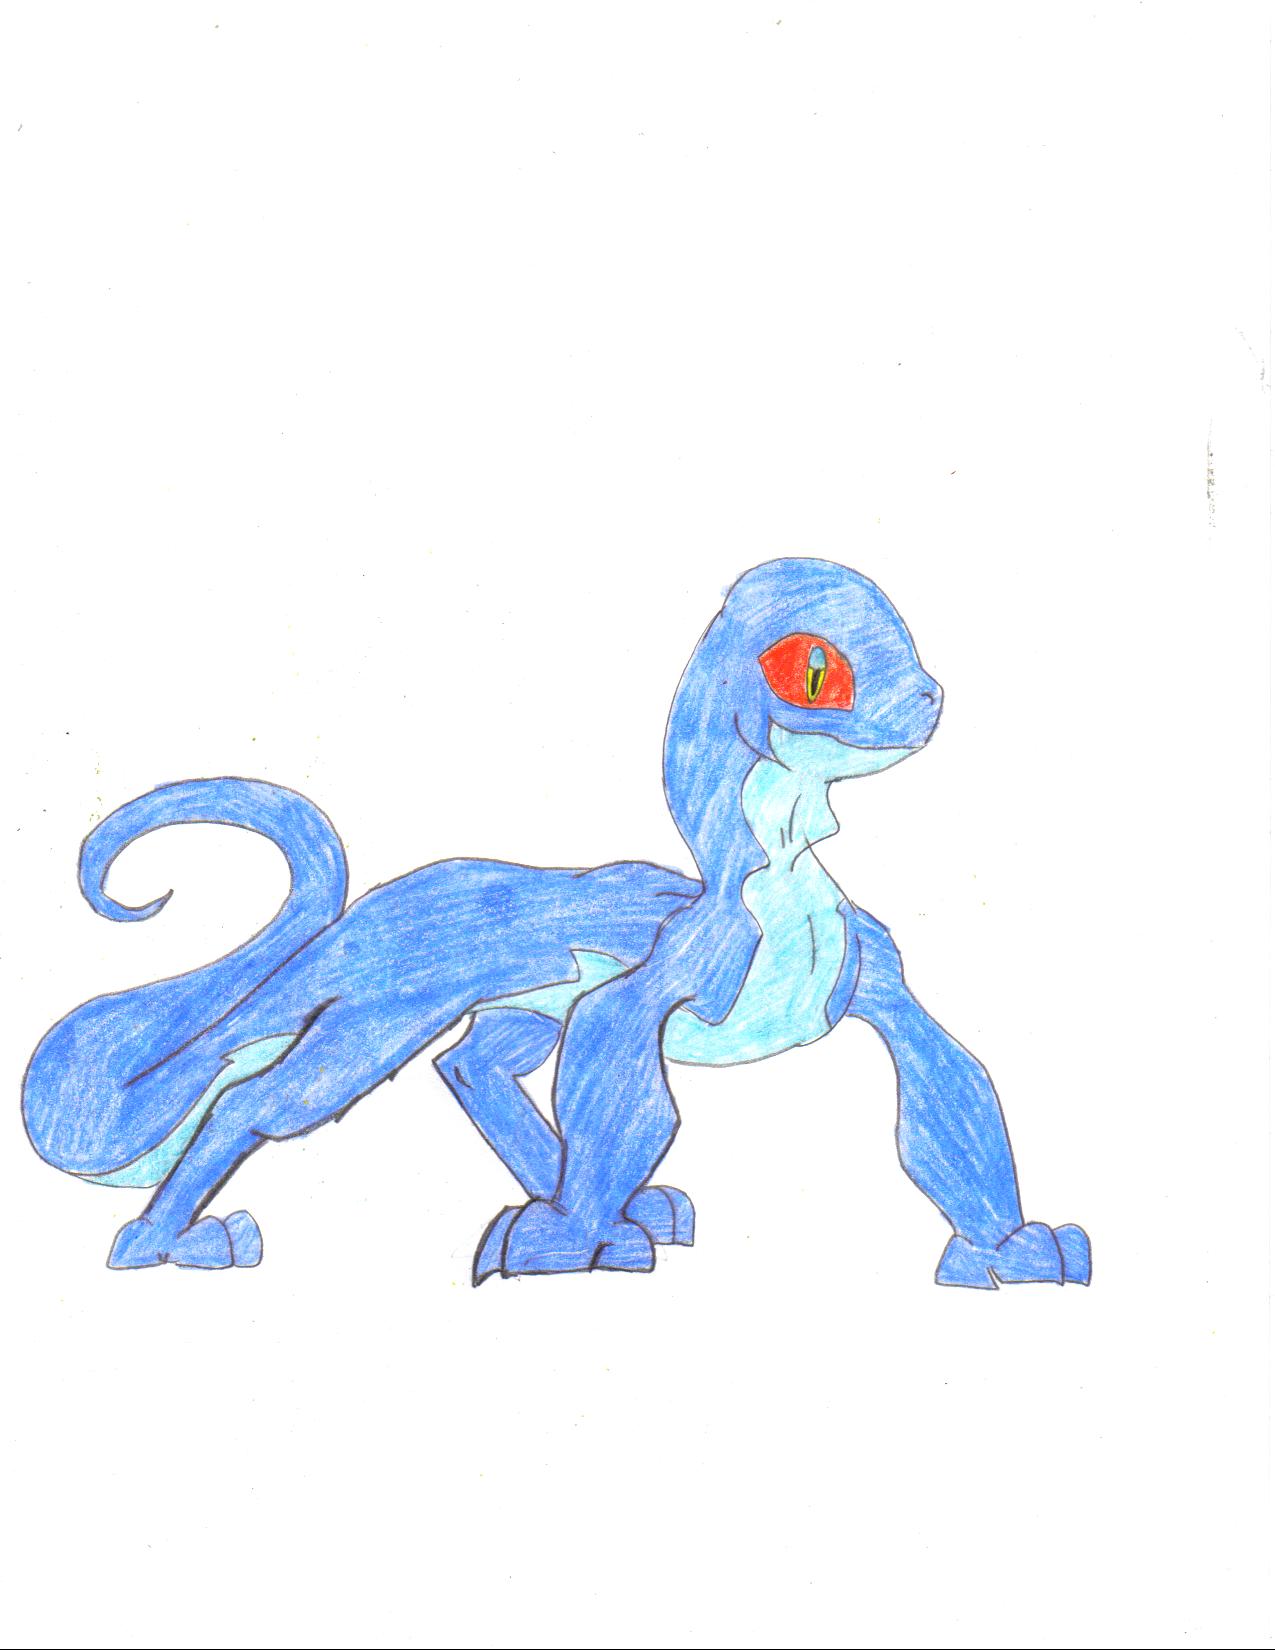 A Blue Lizard (requested for Kratosgirl14) by crocdragon89